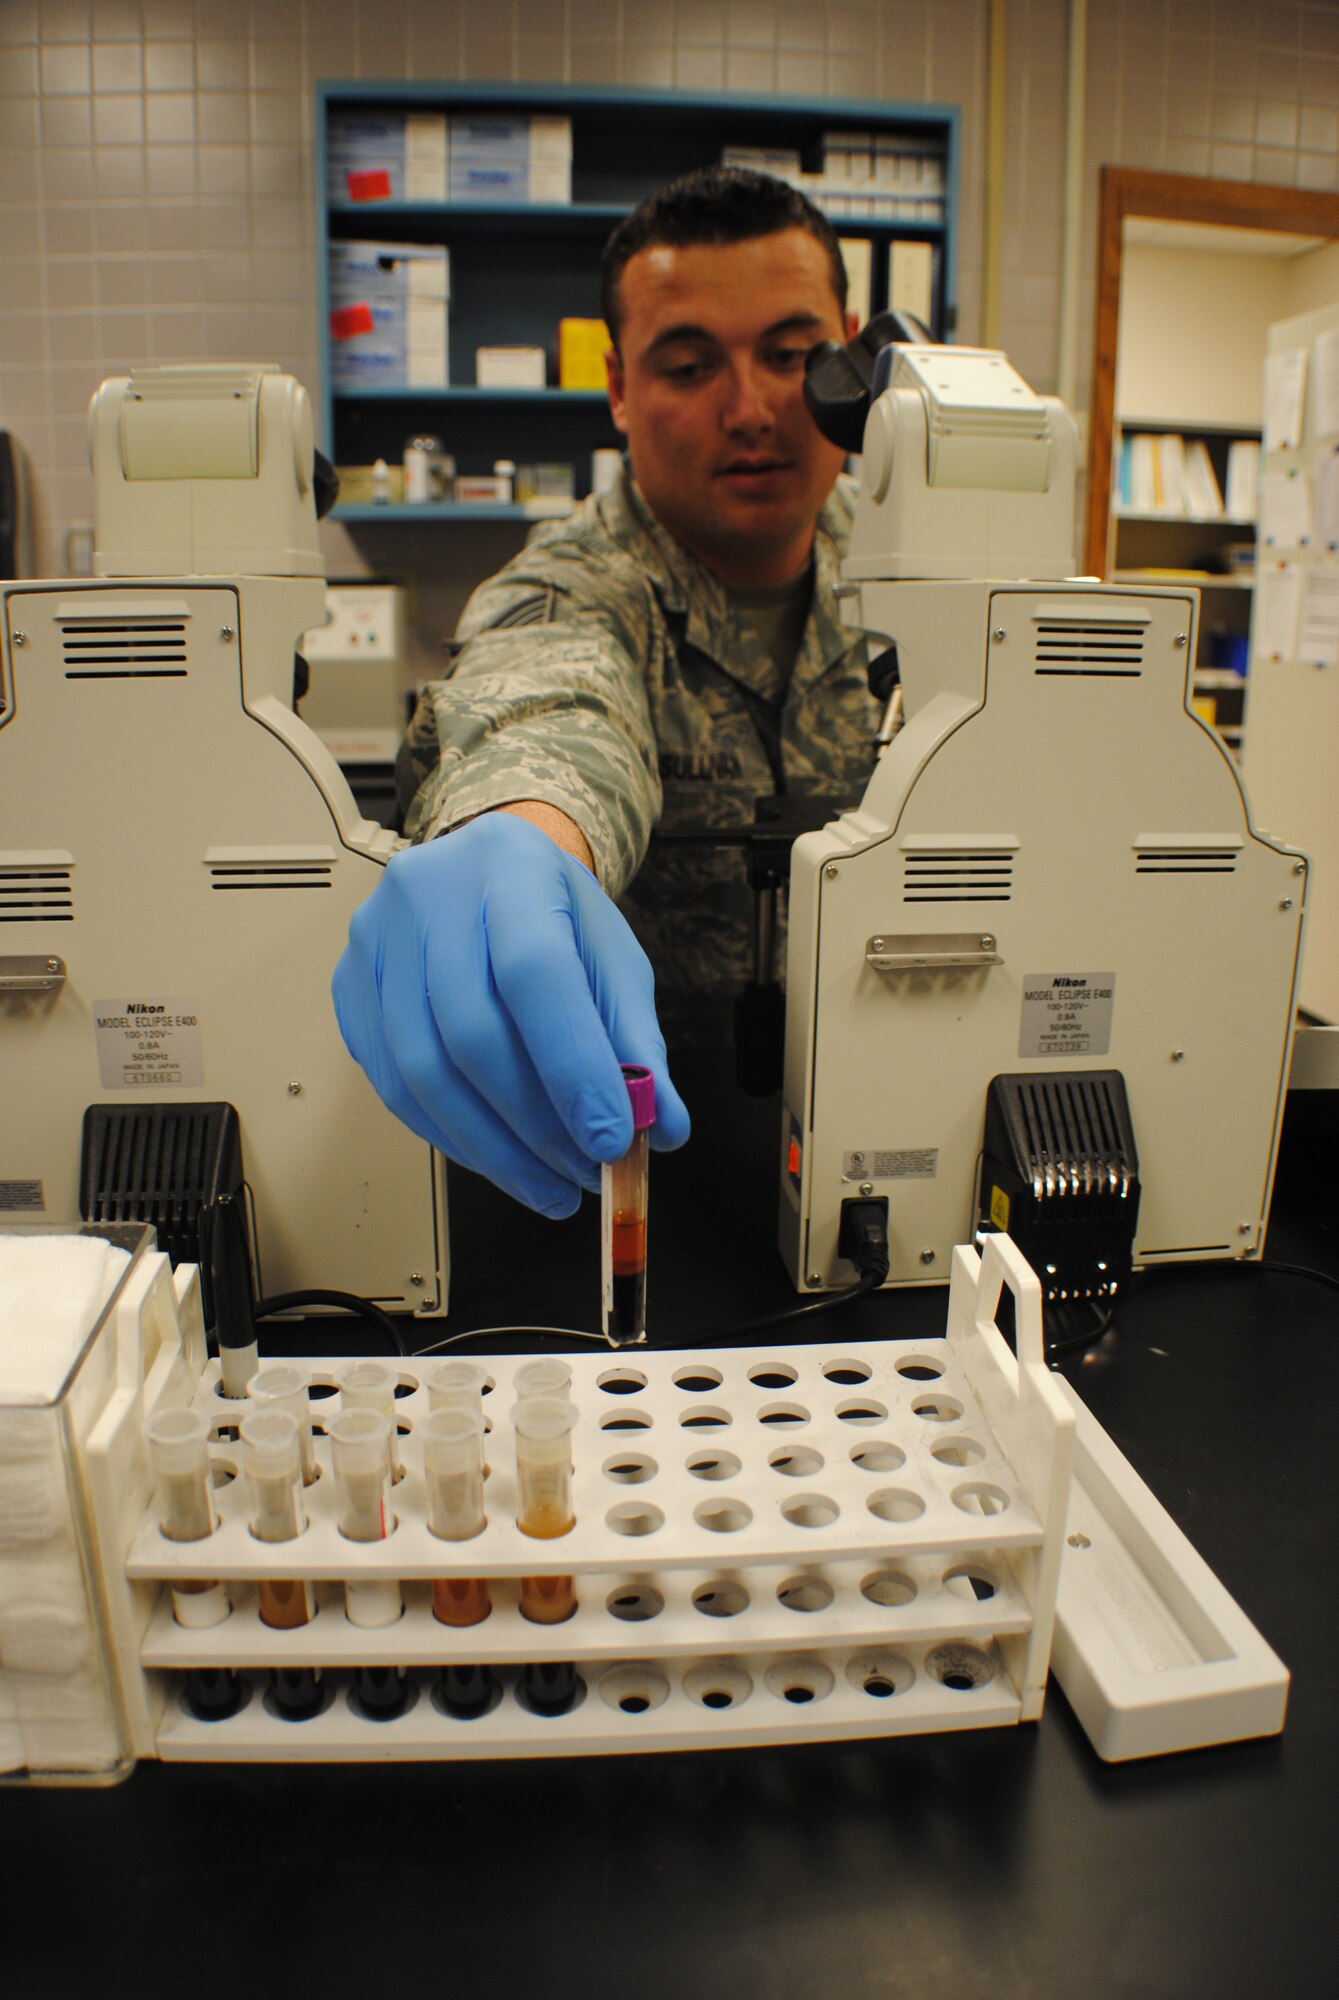 Staff Sgt. Thomas C. Sullivan Jr., 319th Medical Support Squadron laboratory technician, carefully places a medical sample back into a test tube rack May 22, 2013, at the medical laboratory on Grand Forks Air Force Base, N.D. The base medical laboratory processed about 20,000 patient samples in 2012. (U.S. Air Force photo/Staff Sgt. Luis Loza Gutierrez)
